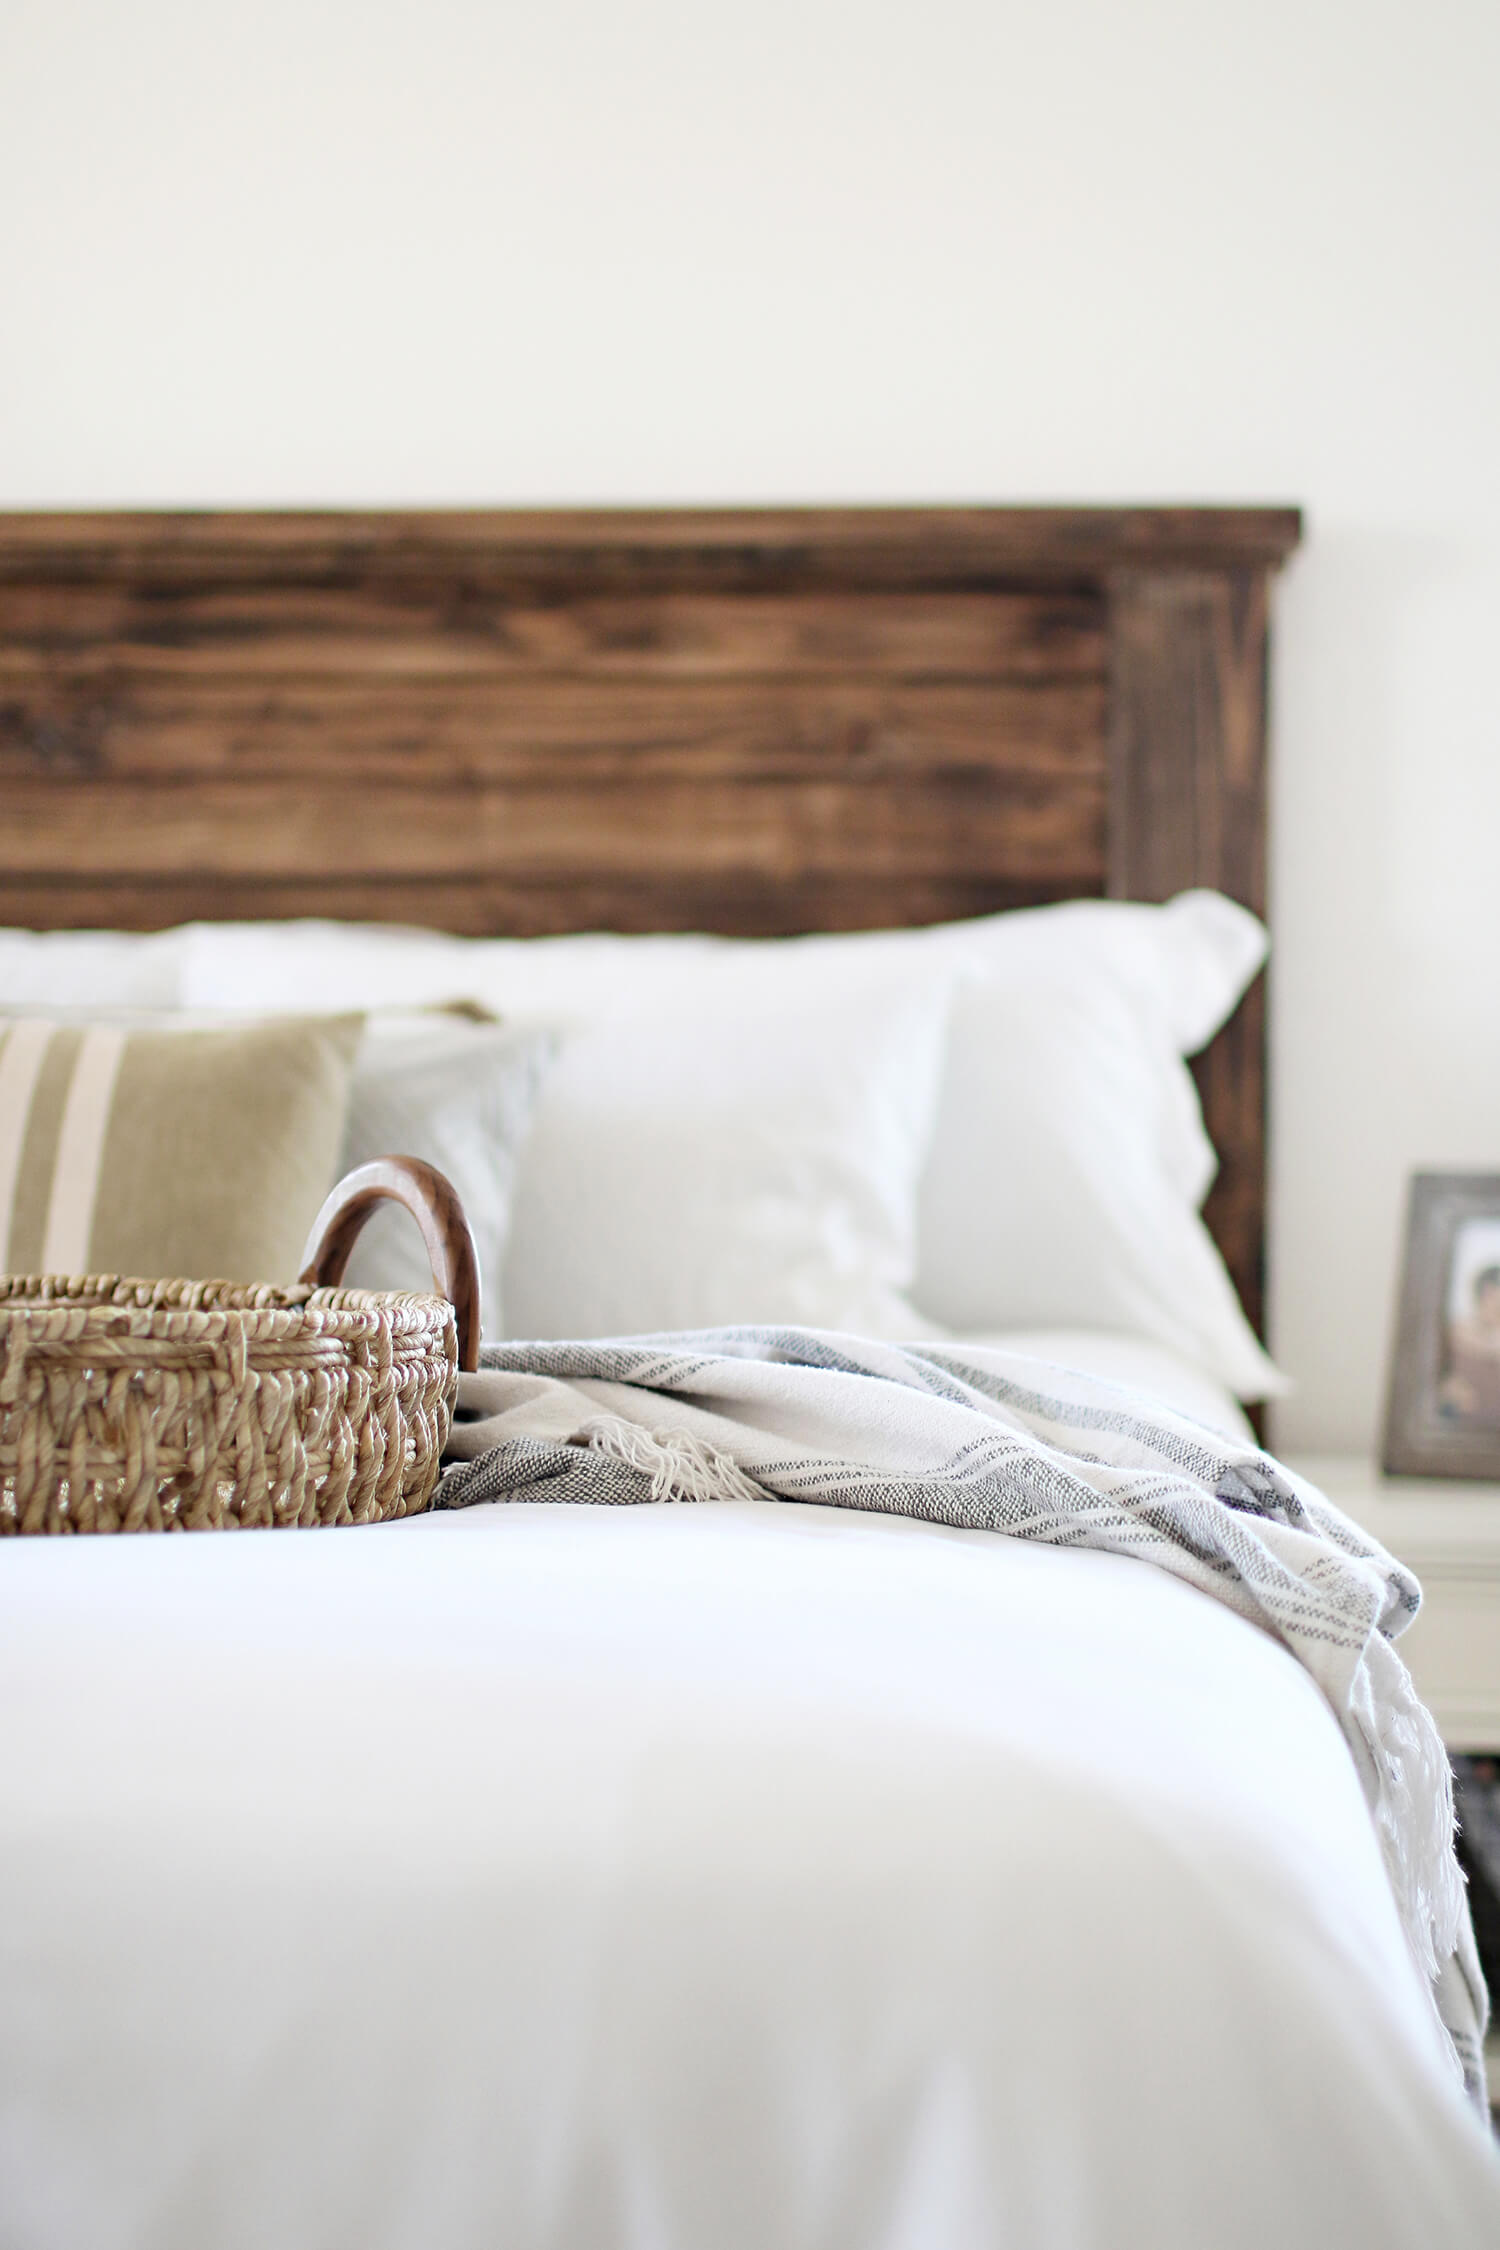 Sharing a DIY farmhouse headboard project including plans and supply list for you! We built this for a California King size bed, but you could easily customize the measurements for your own DIY headboard. Catch it now over on KaraLayne.com!